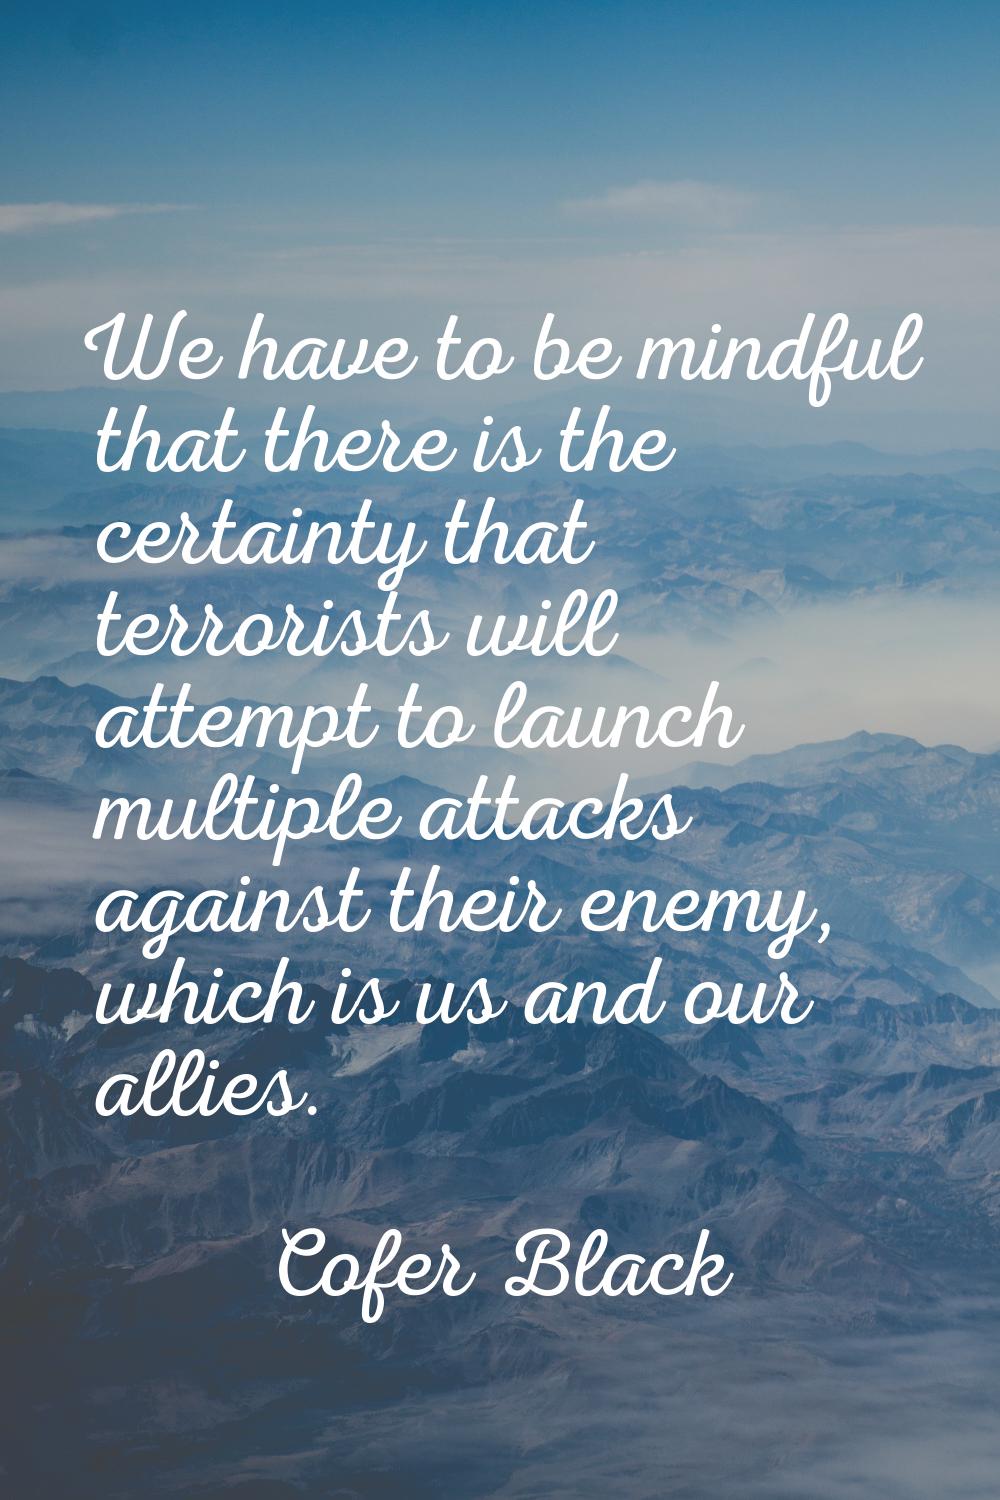 We have to be mindful that there is the certainty that terrorists will attempt to launch multiple a